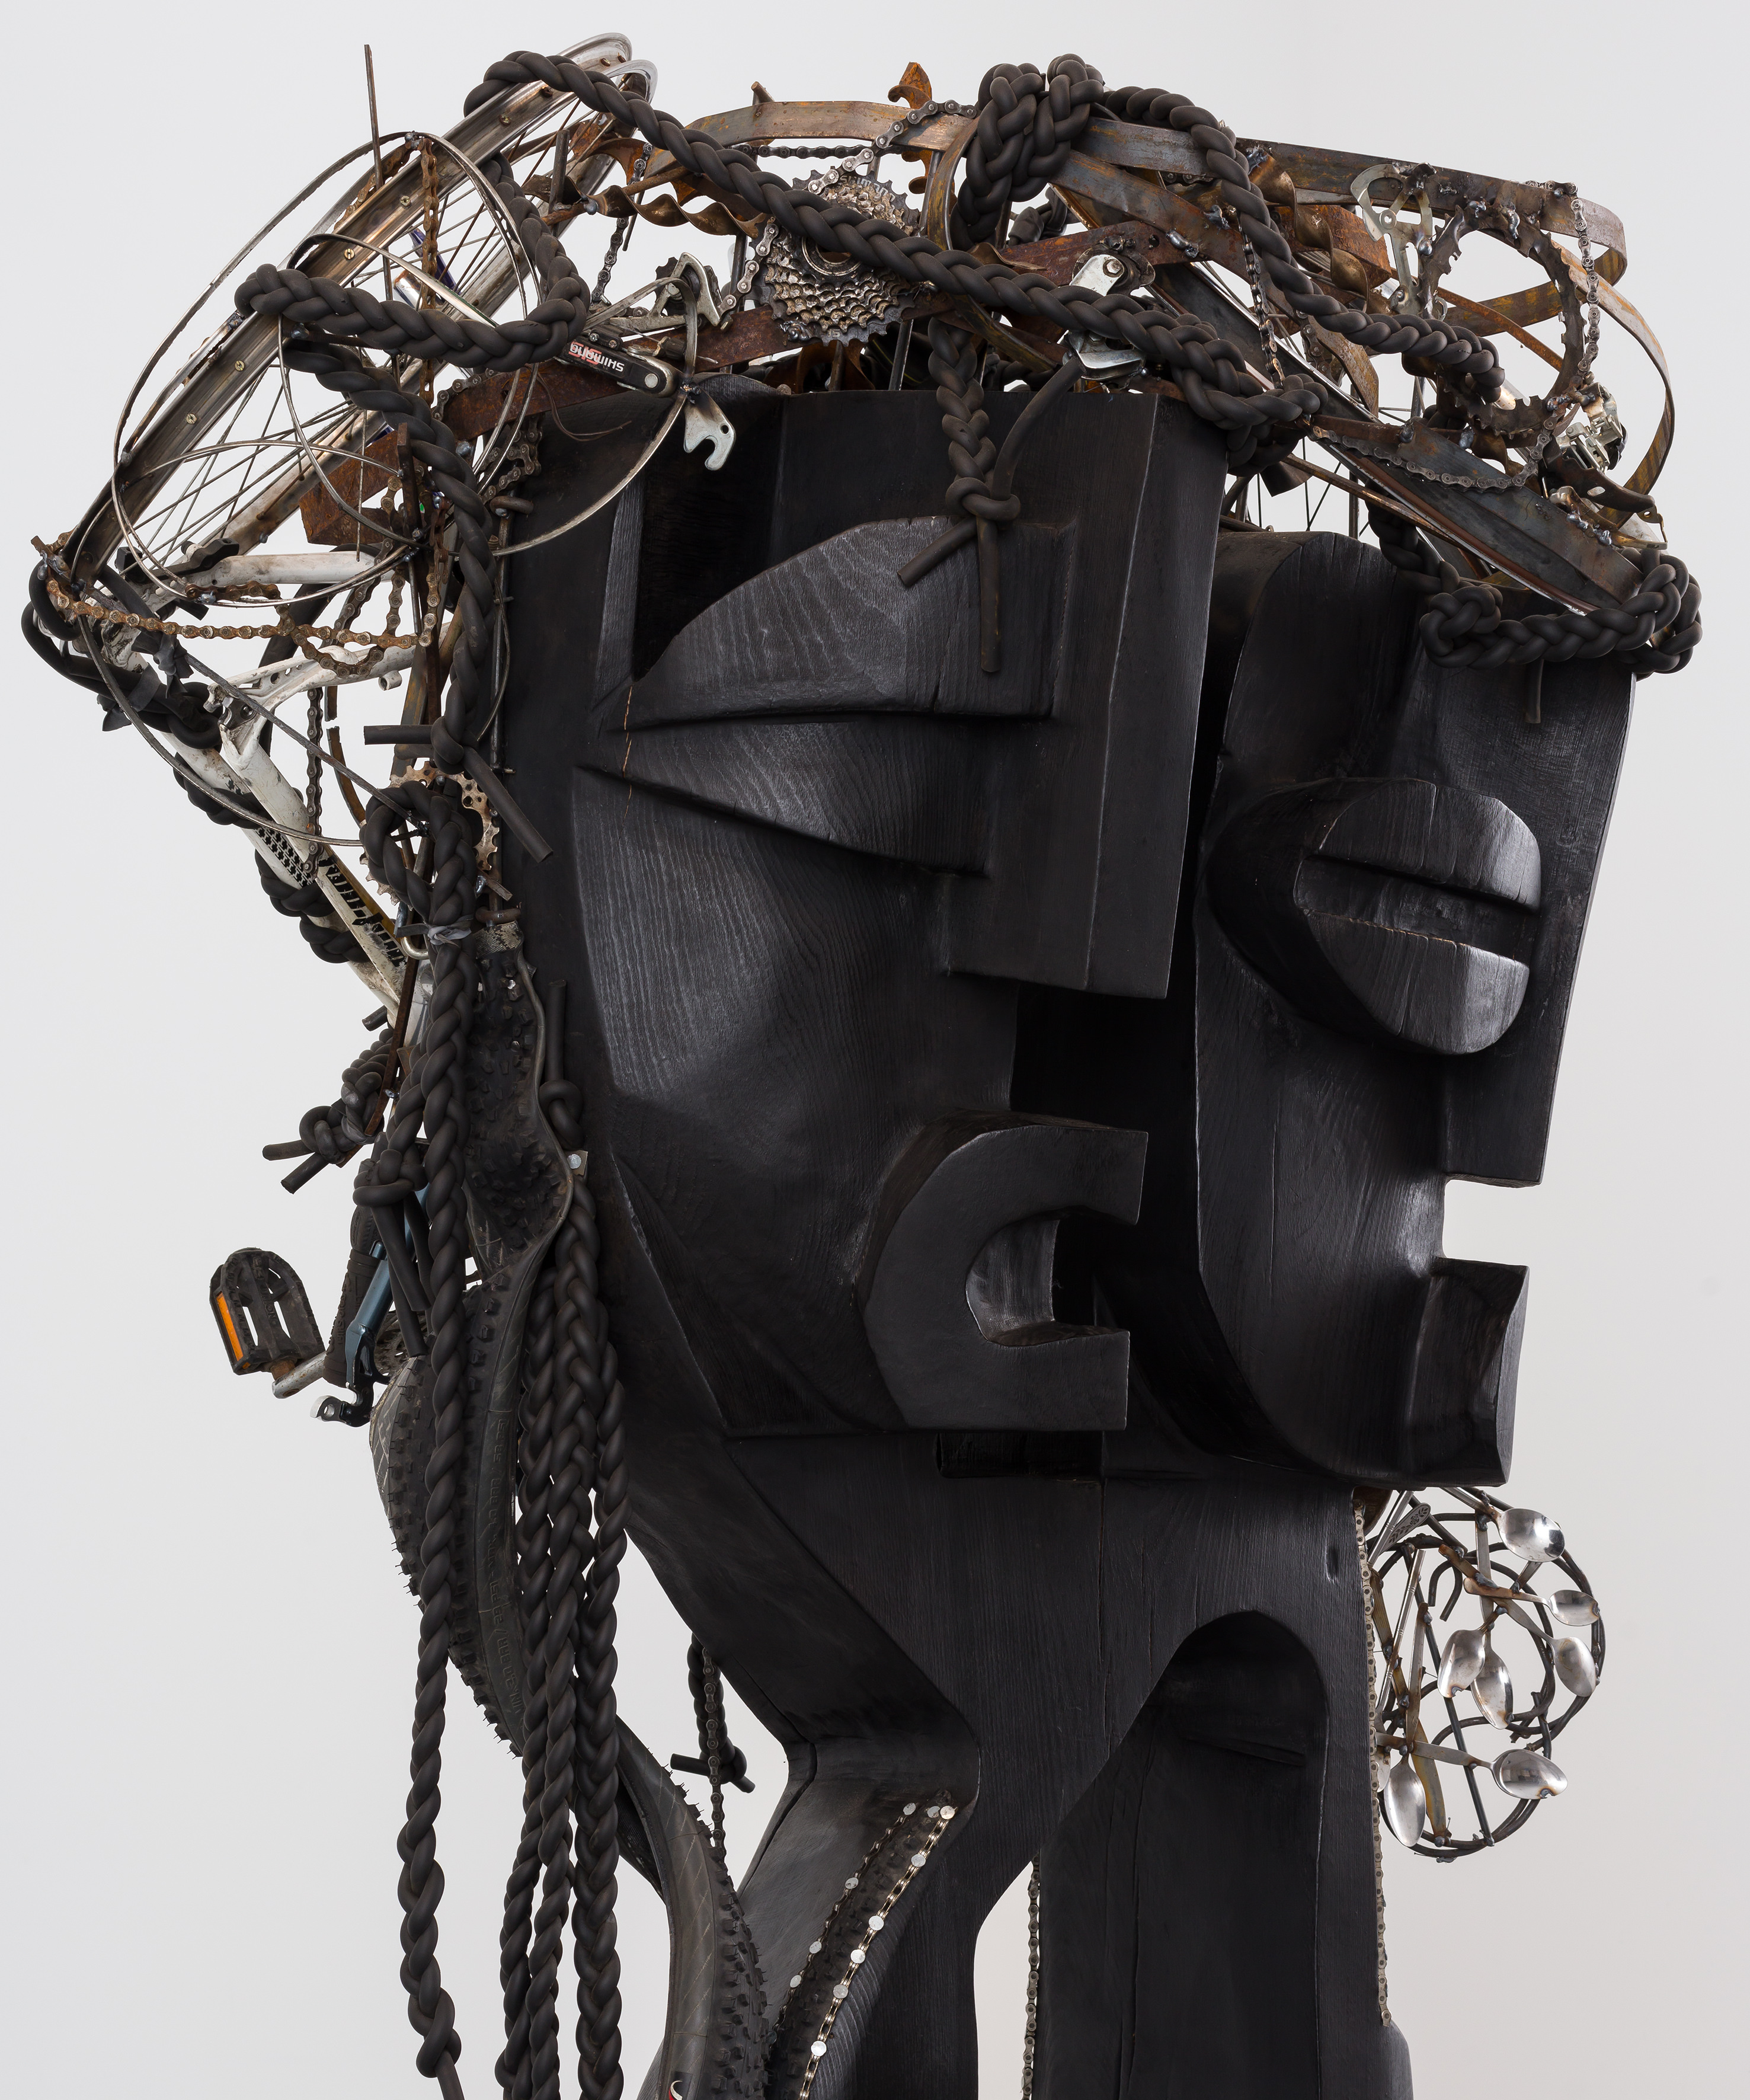 A wooden sculpture of two headed humanoid figure, with hair & accessories made from bicycle parts